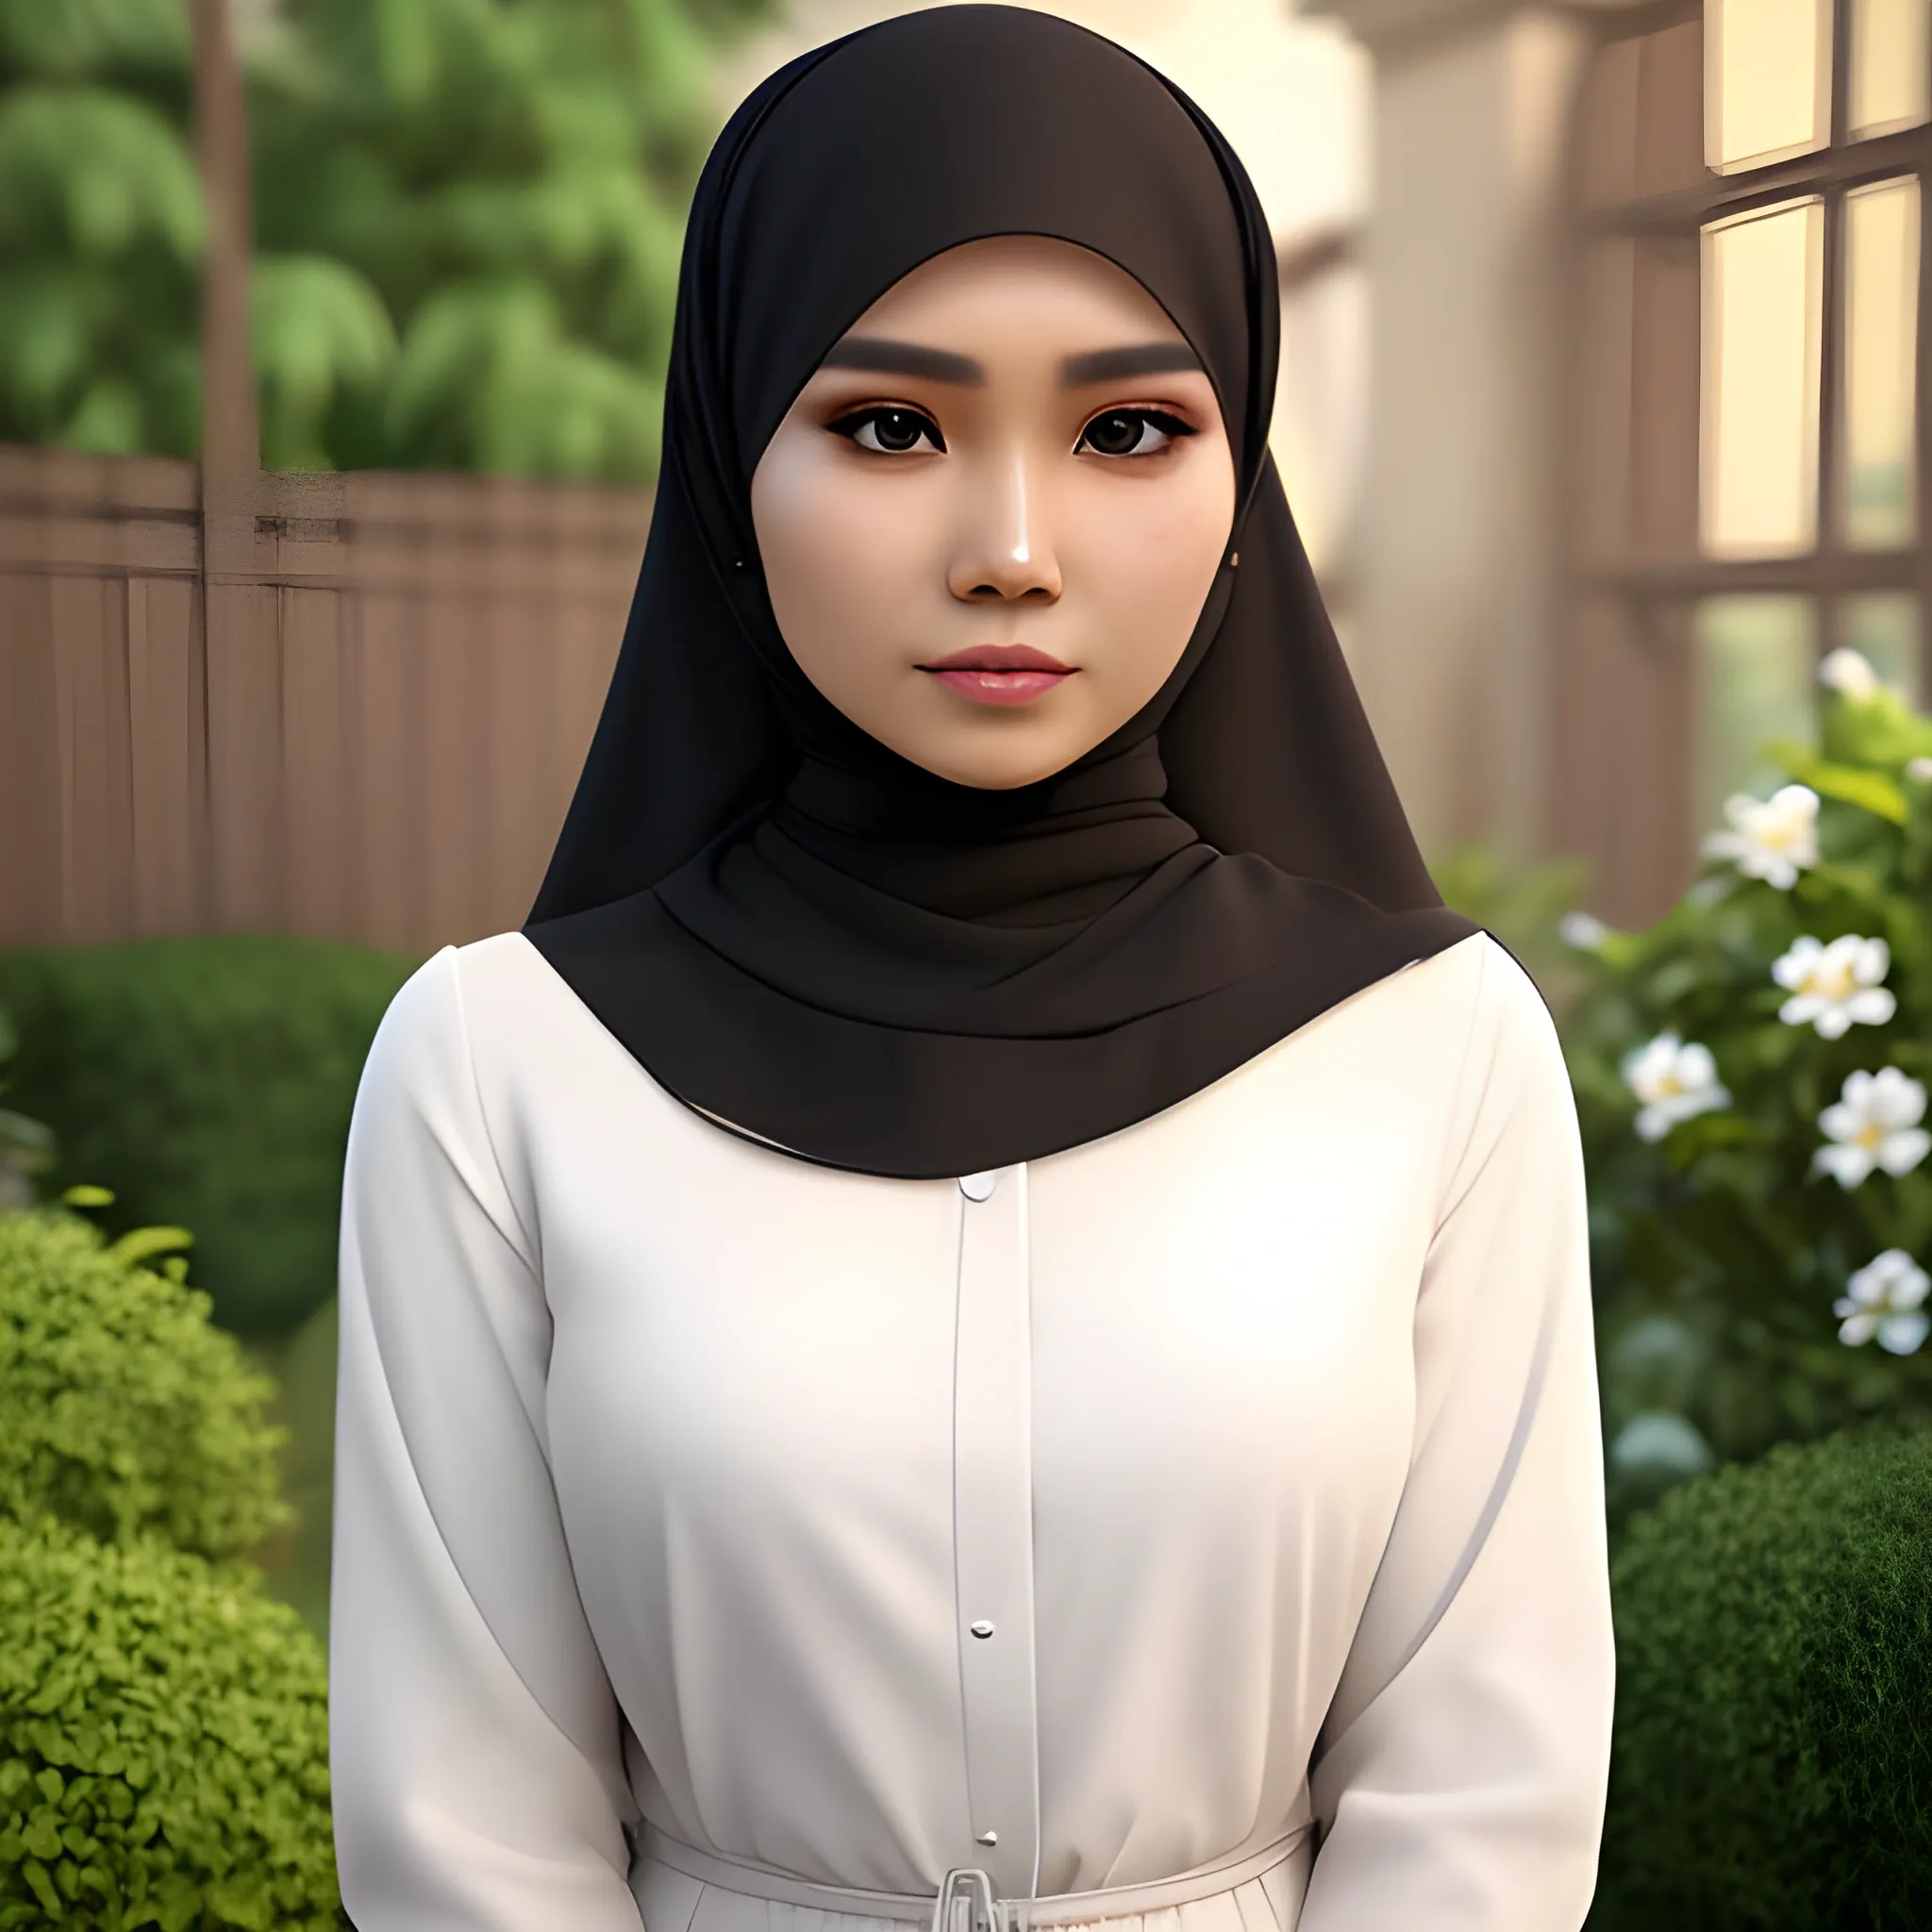 pretty women indonesian, elegant, moody, face detail, sharp nose, black eyes, wearing a brown hijab, white blouse, casual, in the garden, her eyes looking at camera, 4k, 3D